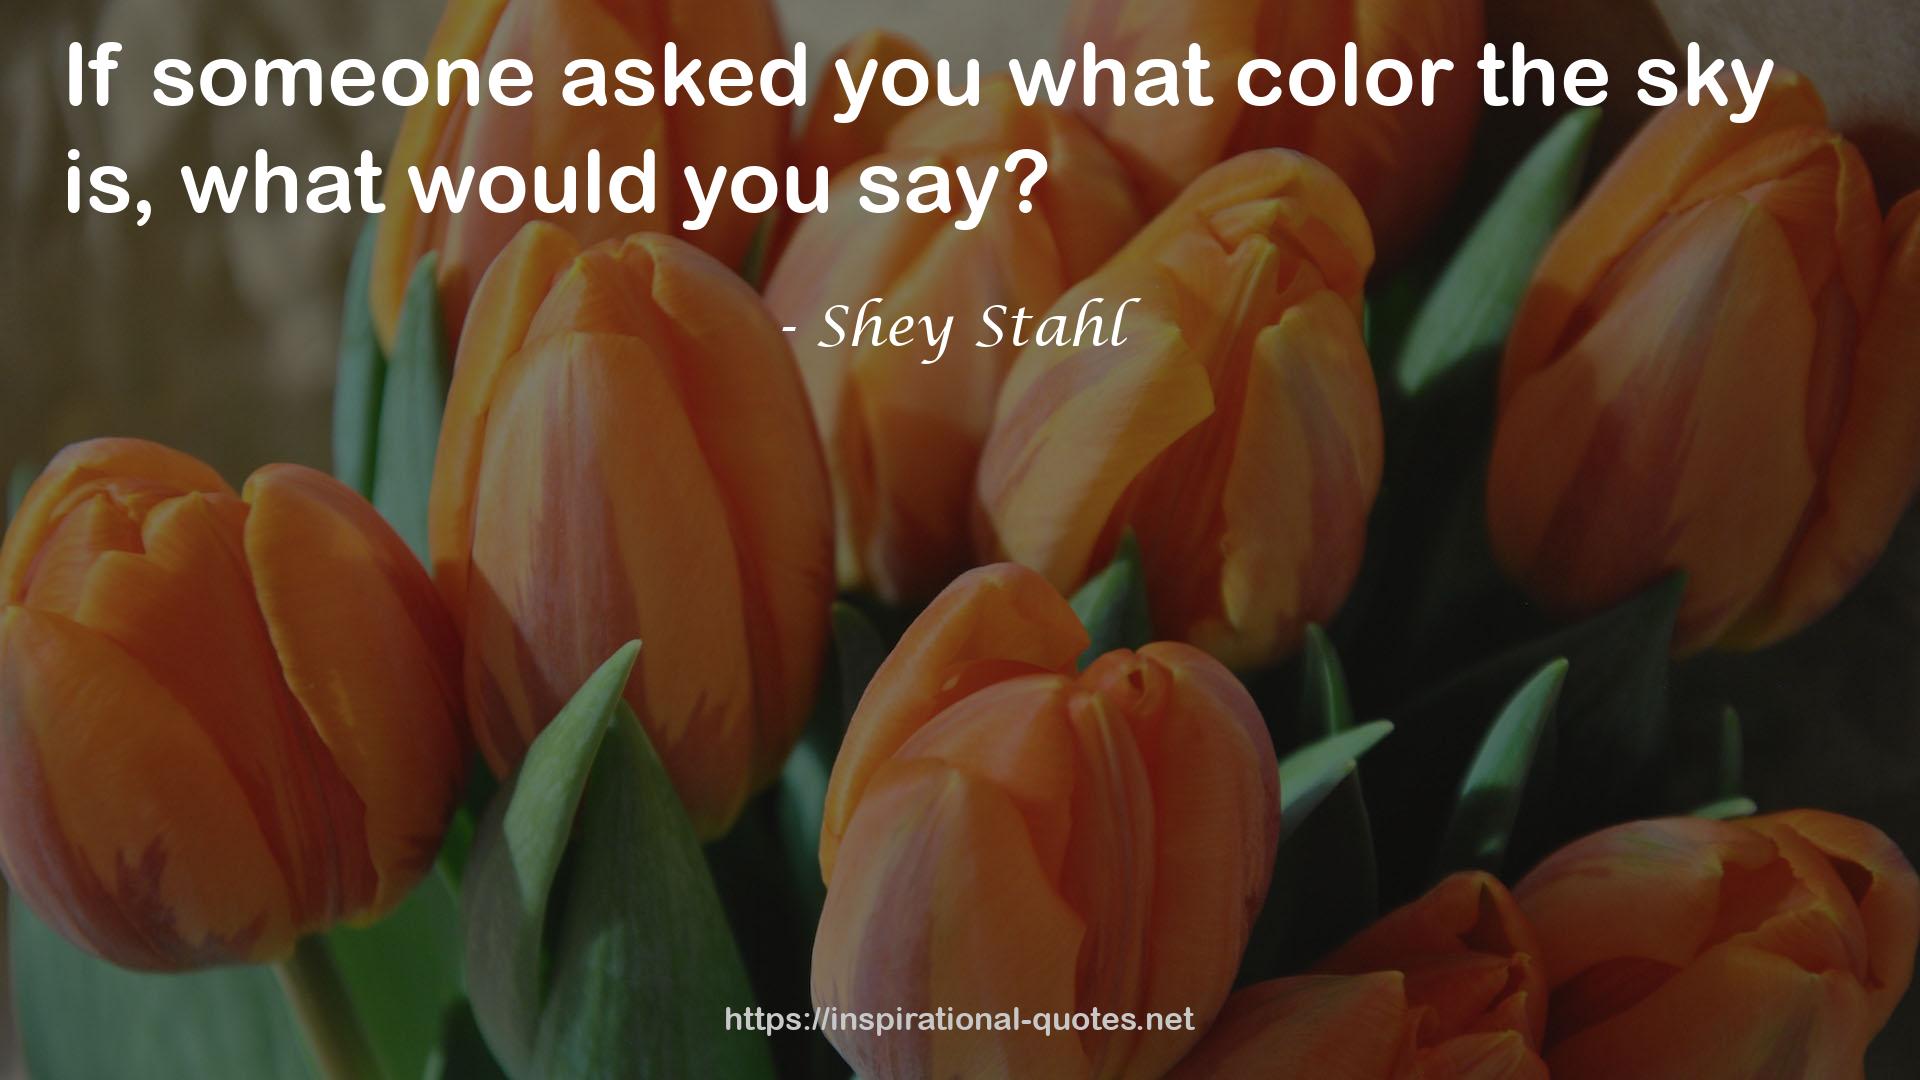 Shey Stahl QUOTES